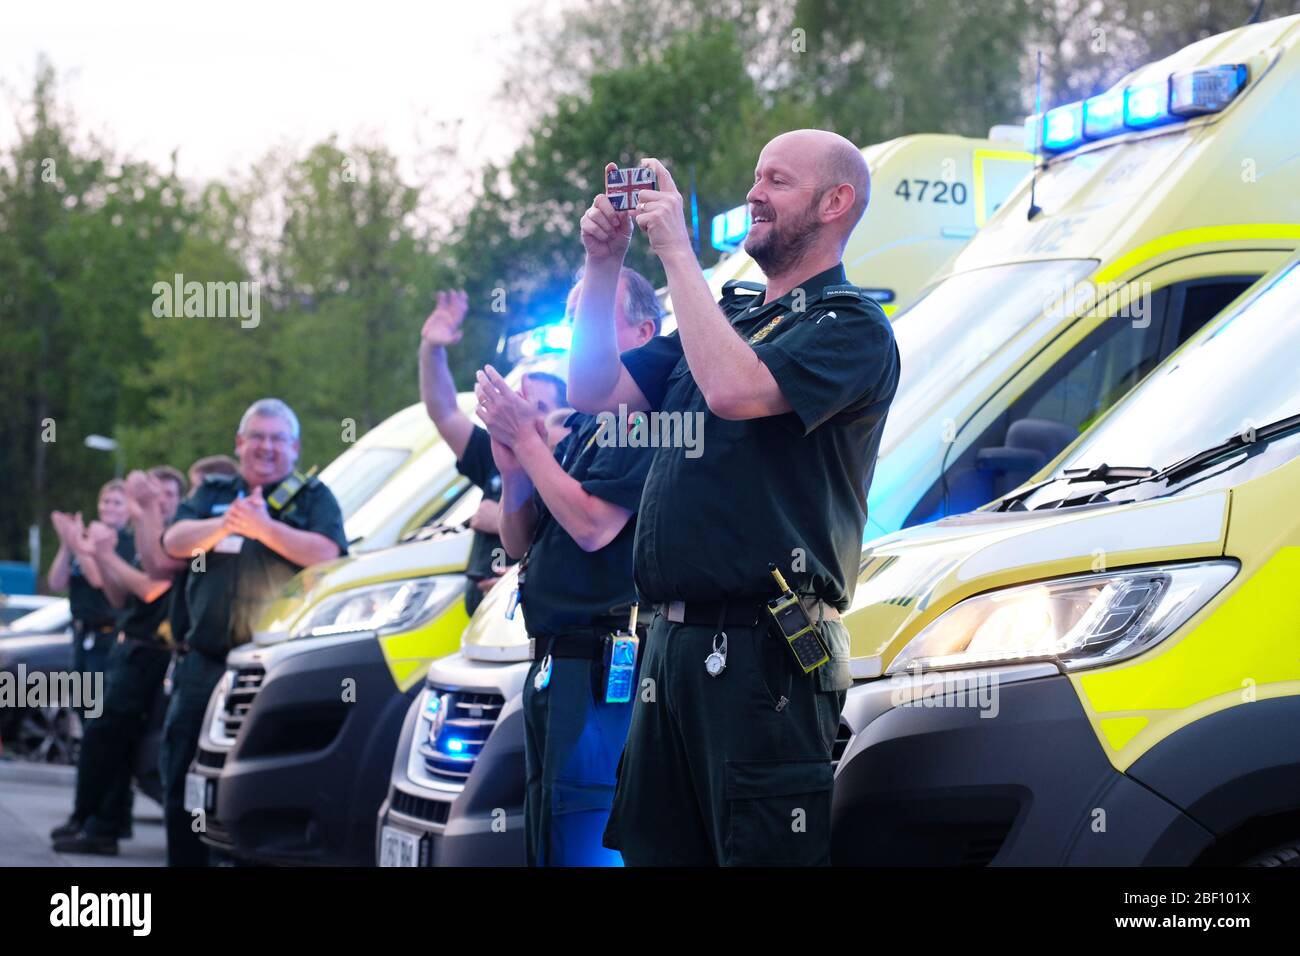 Hereford, Herefordshire, UK – Thursday 16th April 2020 – NHS ambulance crew and paramedics stand outside the A&E unit at the County Hospital in Hereford at 8pm to clap for their colleagues and other key emergency workers for the fourth consecutive Thursday since the Coronavirus Covid-19 lockdown started. Photo Steven May / Alamy Live News Stock Photo